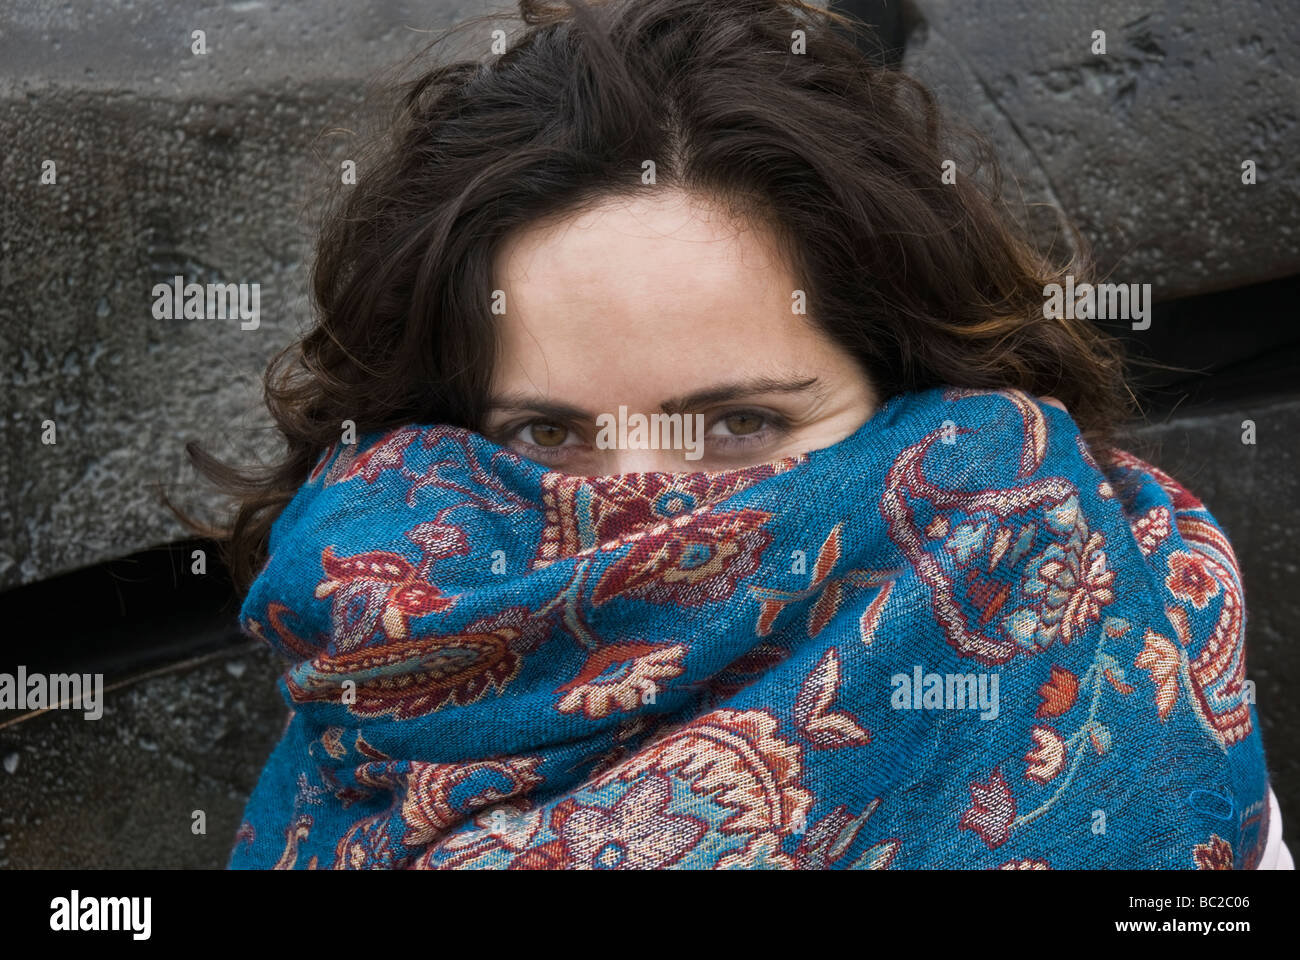 TURKISH WOMAN IN HER EARLY THIRTY'S HIDING HER FACE WITH THE SHAWL Stock Photo